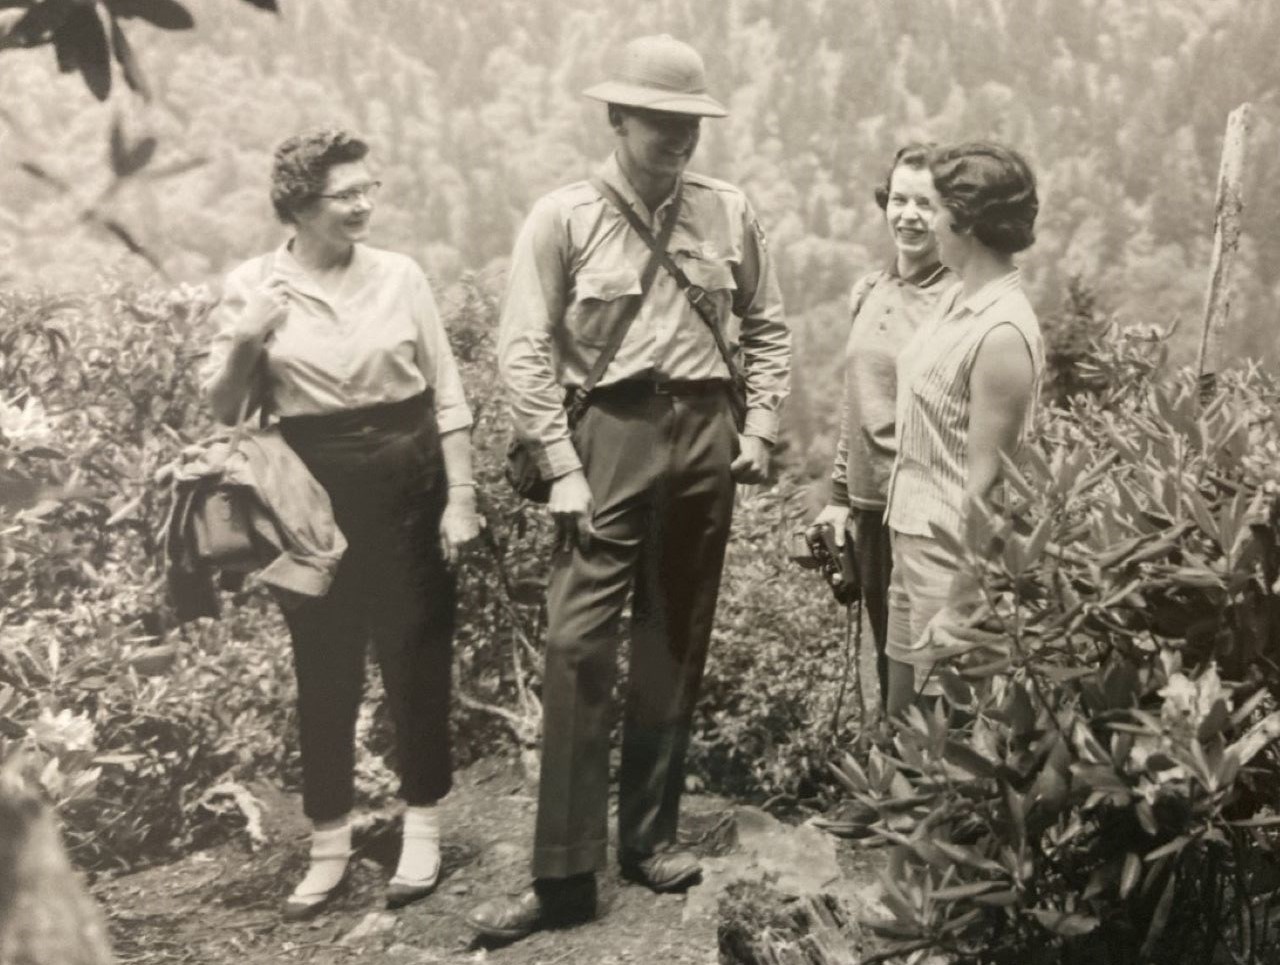 Ranger wearing a sun helmet stands talking with three women on a hiking trail.